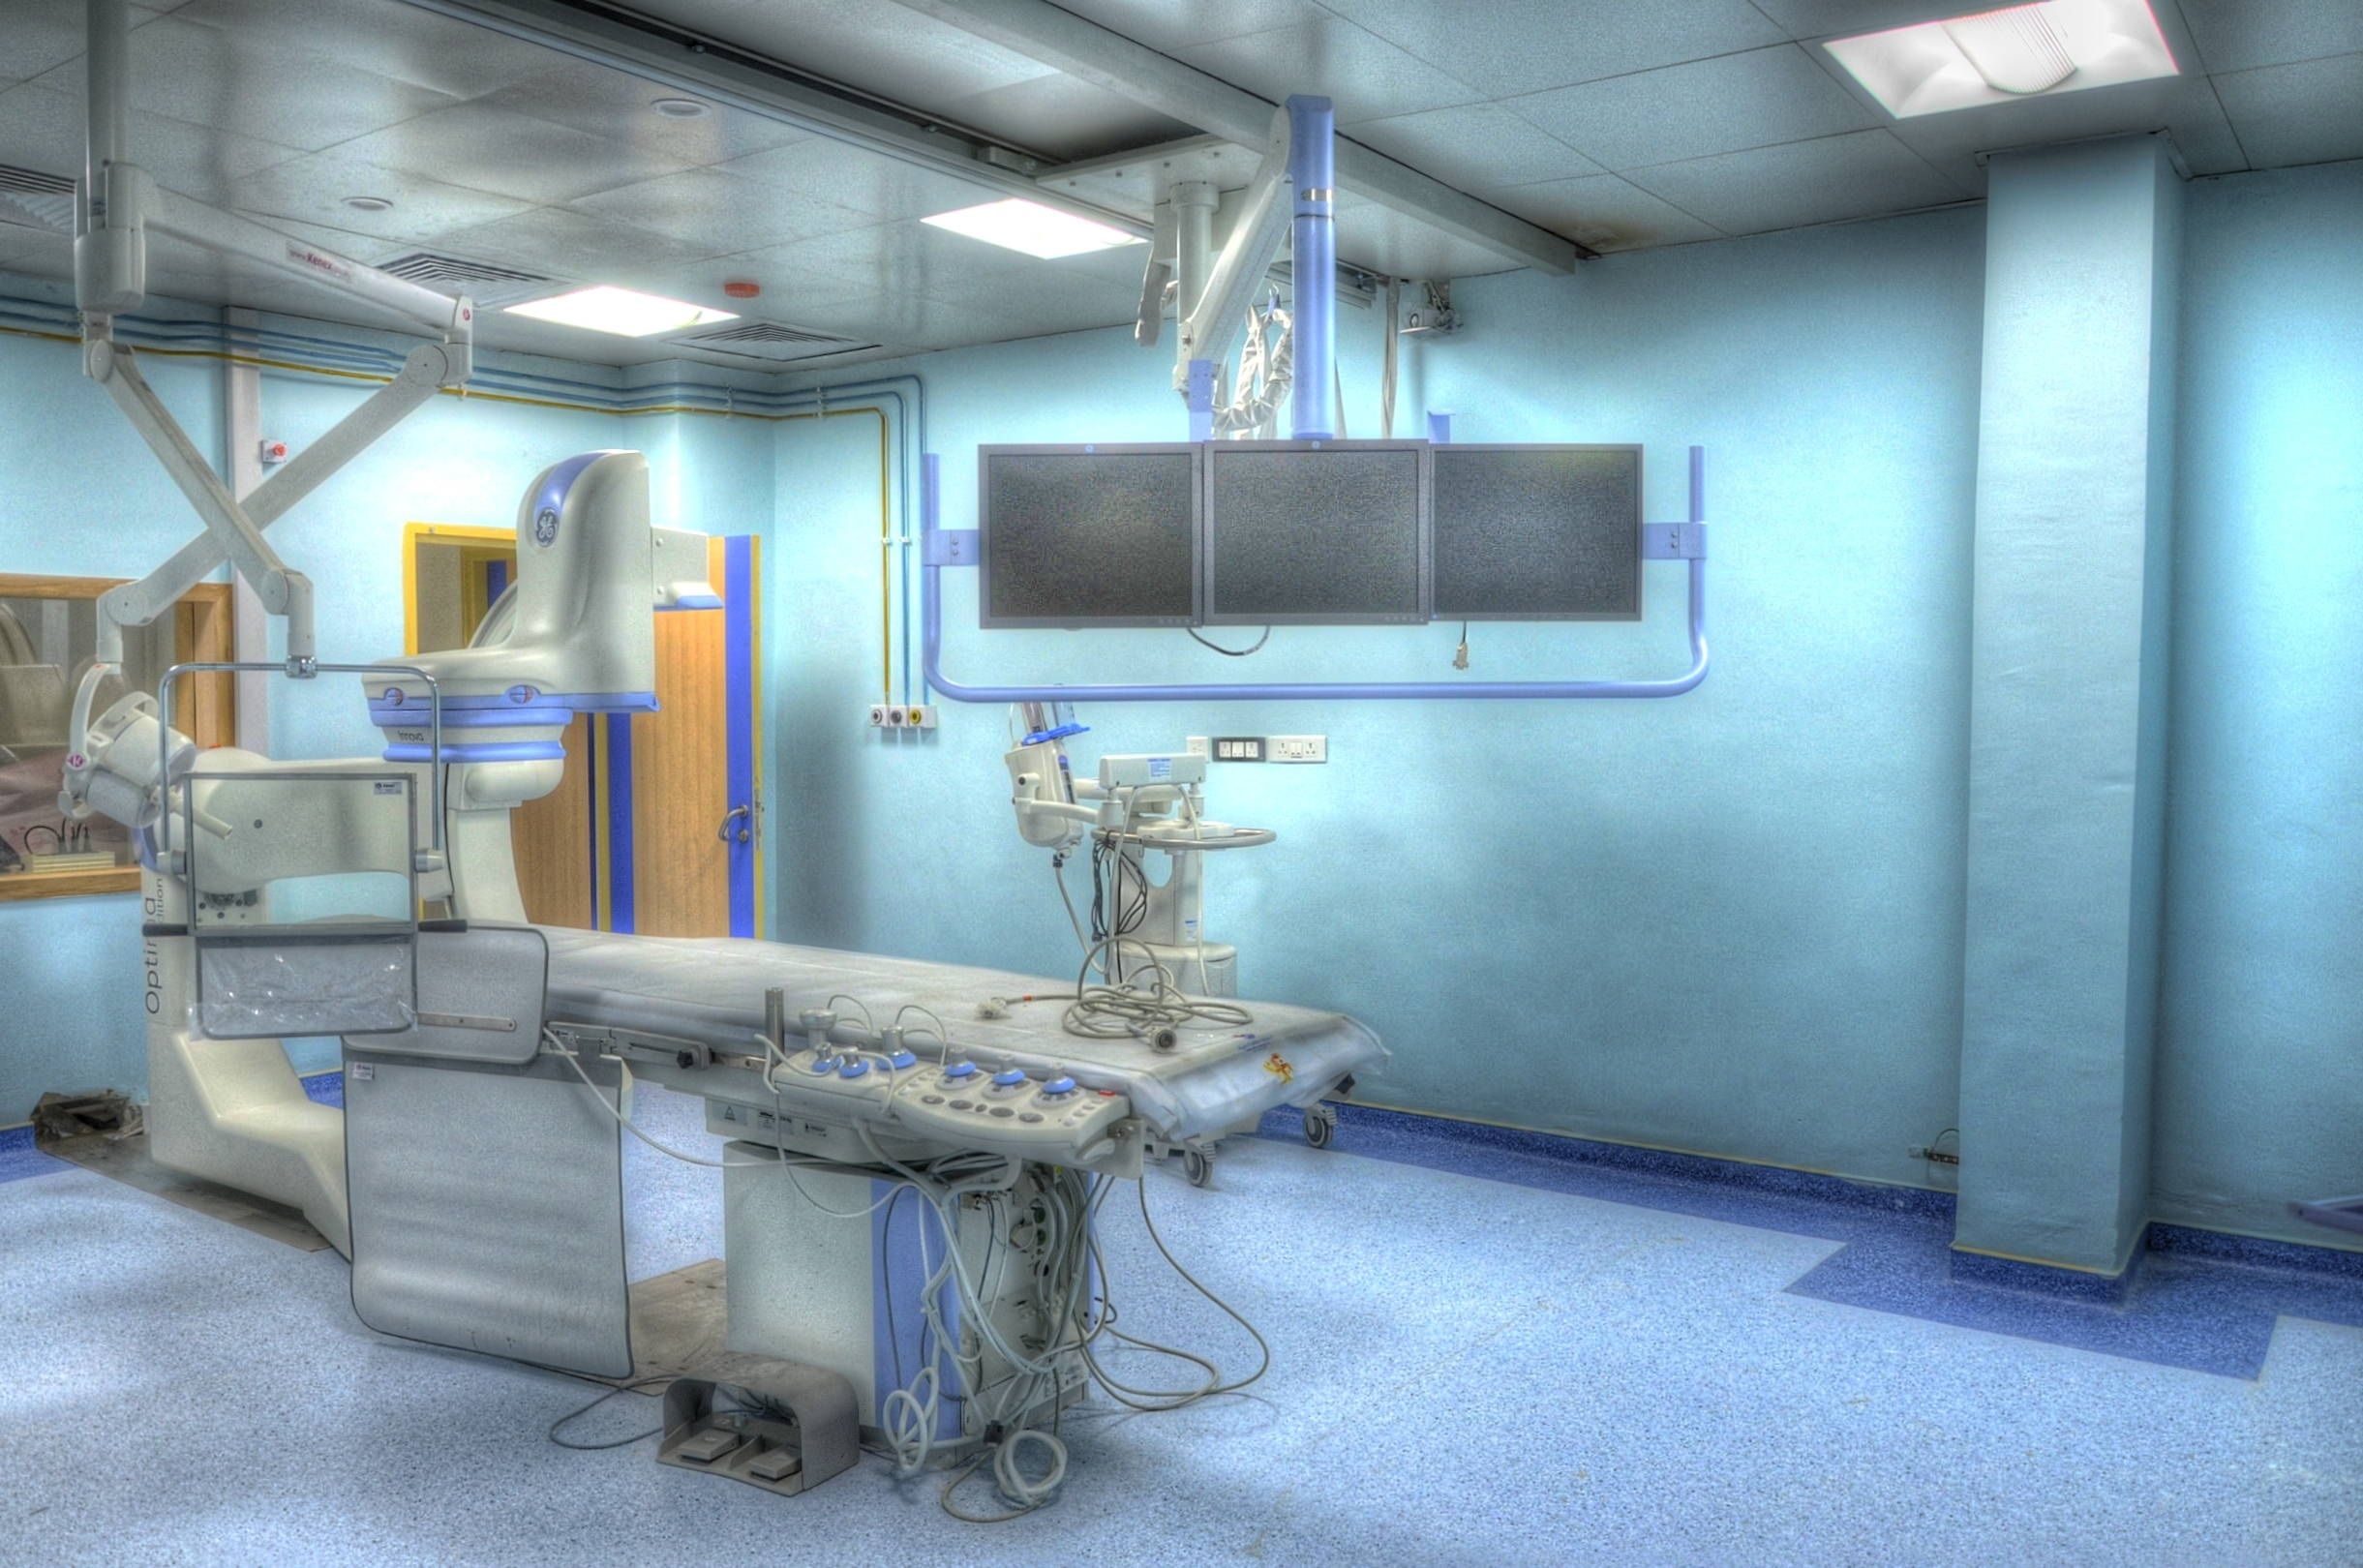 A hospital operating theater